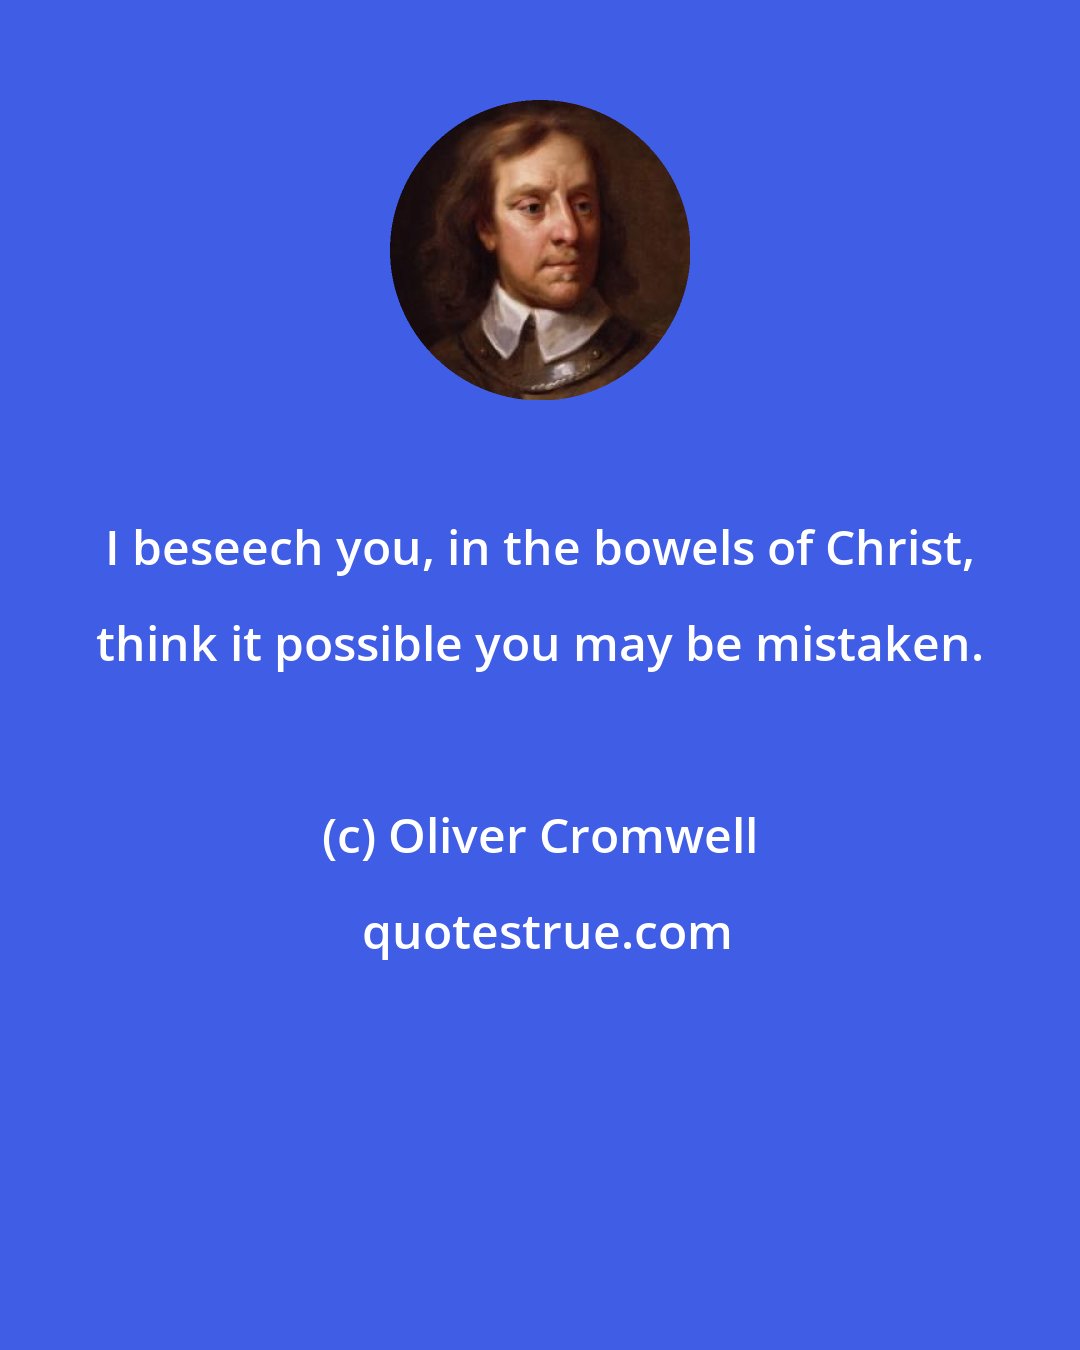 Oliver Cromwell: I beseech you, in the bowels of Christ, think it possible you may be mistaken.